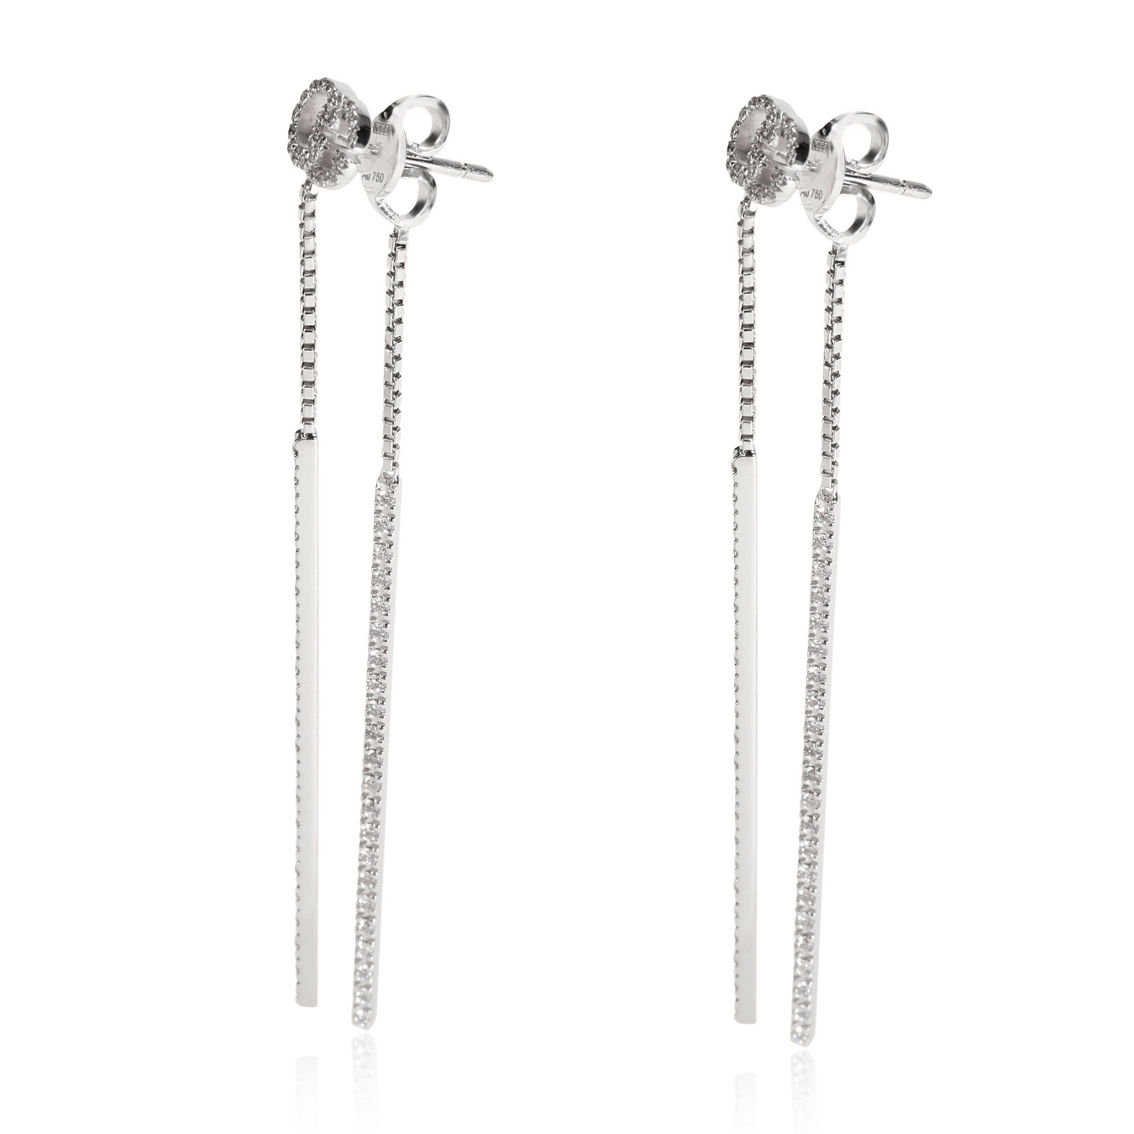 Gucci Running G Diamond Drop Earrings in 18k White Gold 0.56 CTW Pre-Owned - Image 2 of 3